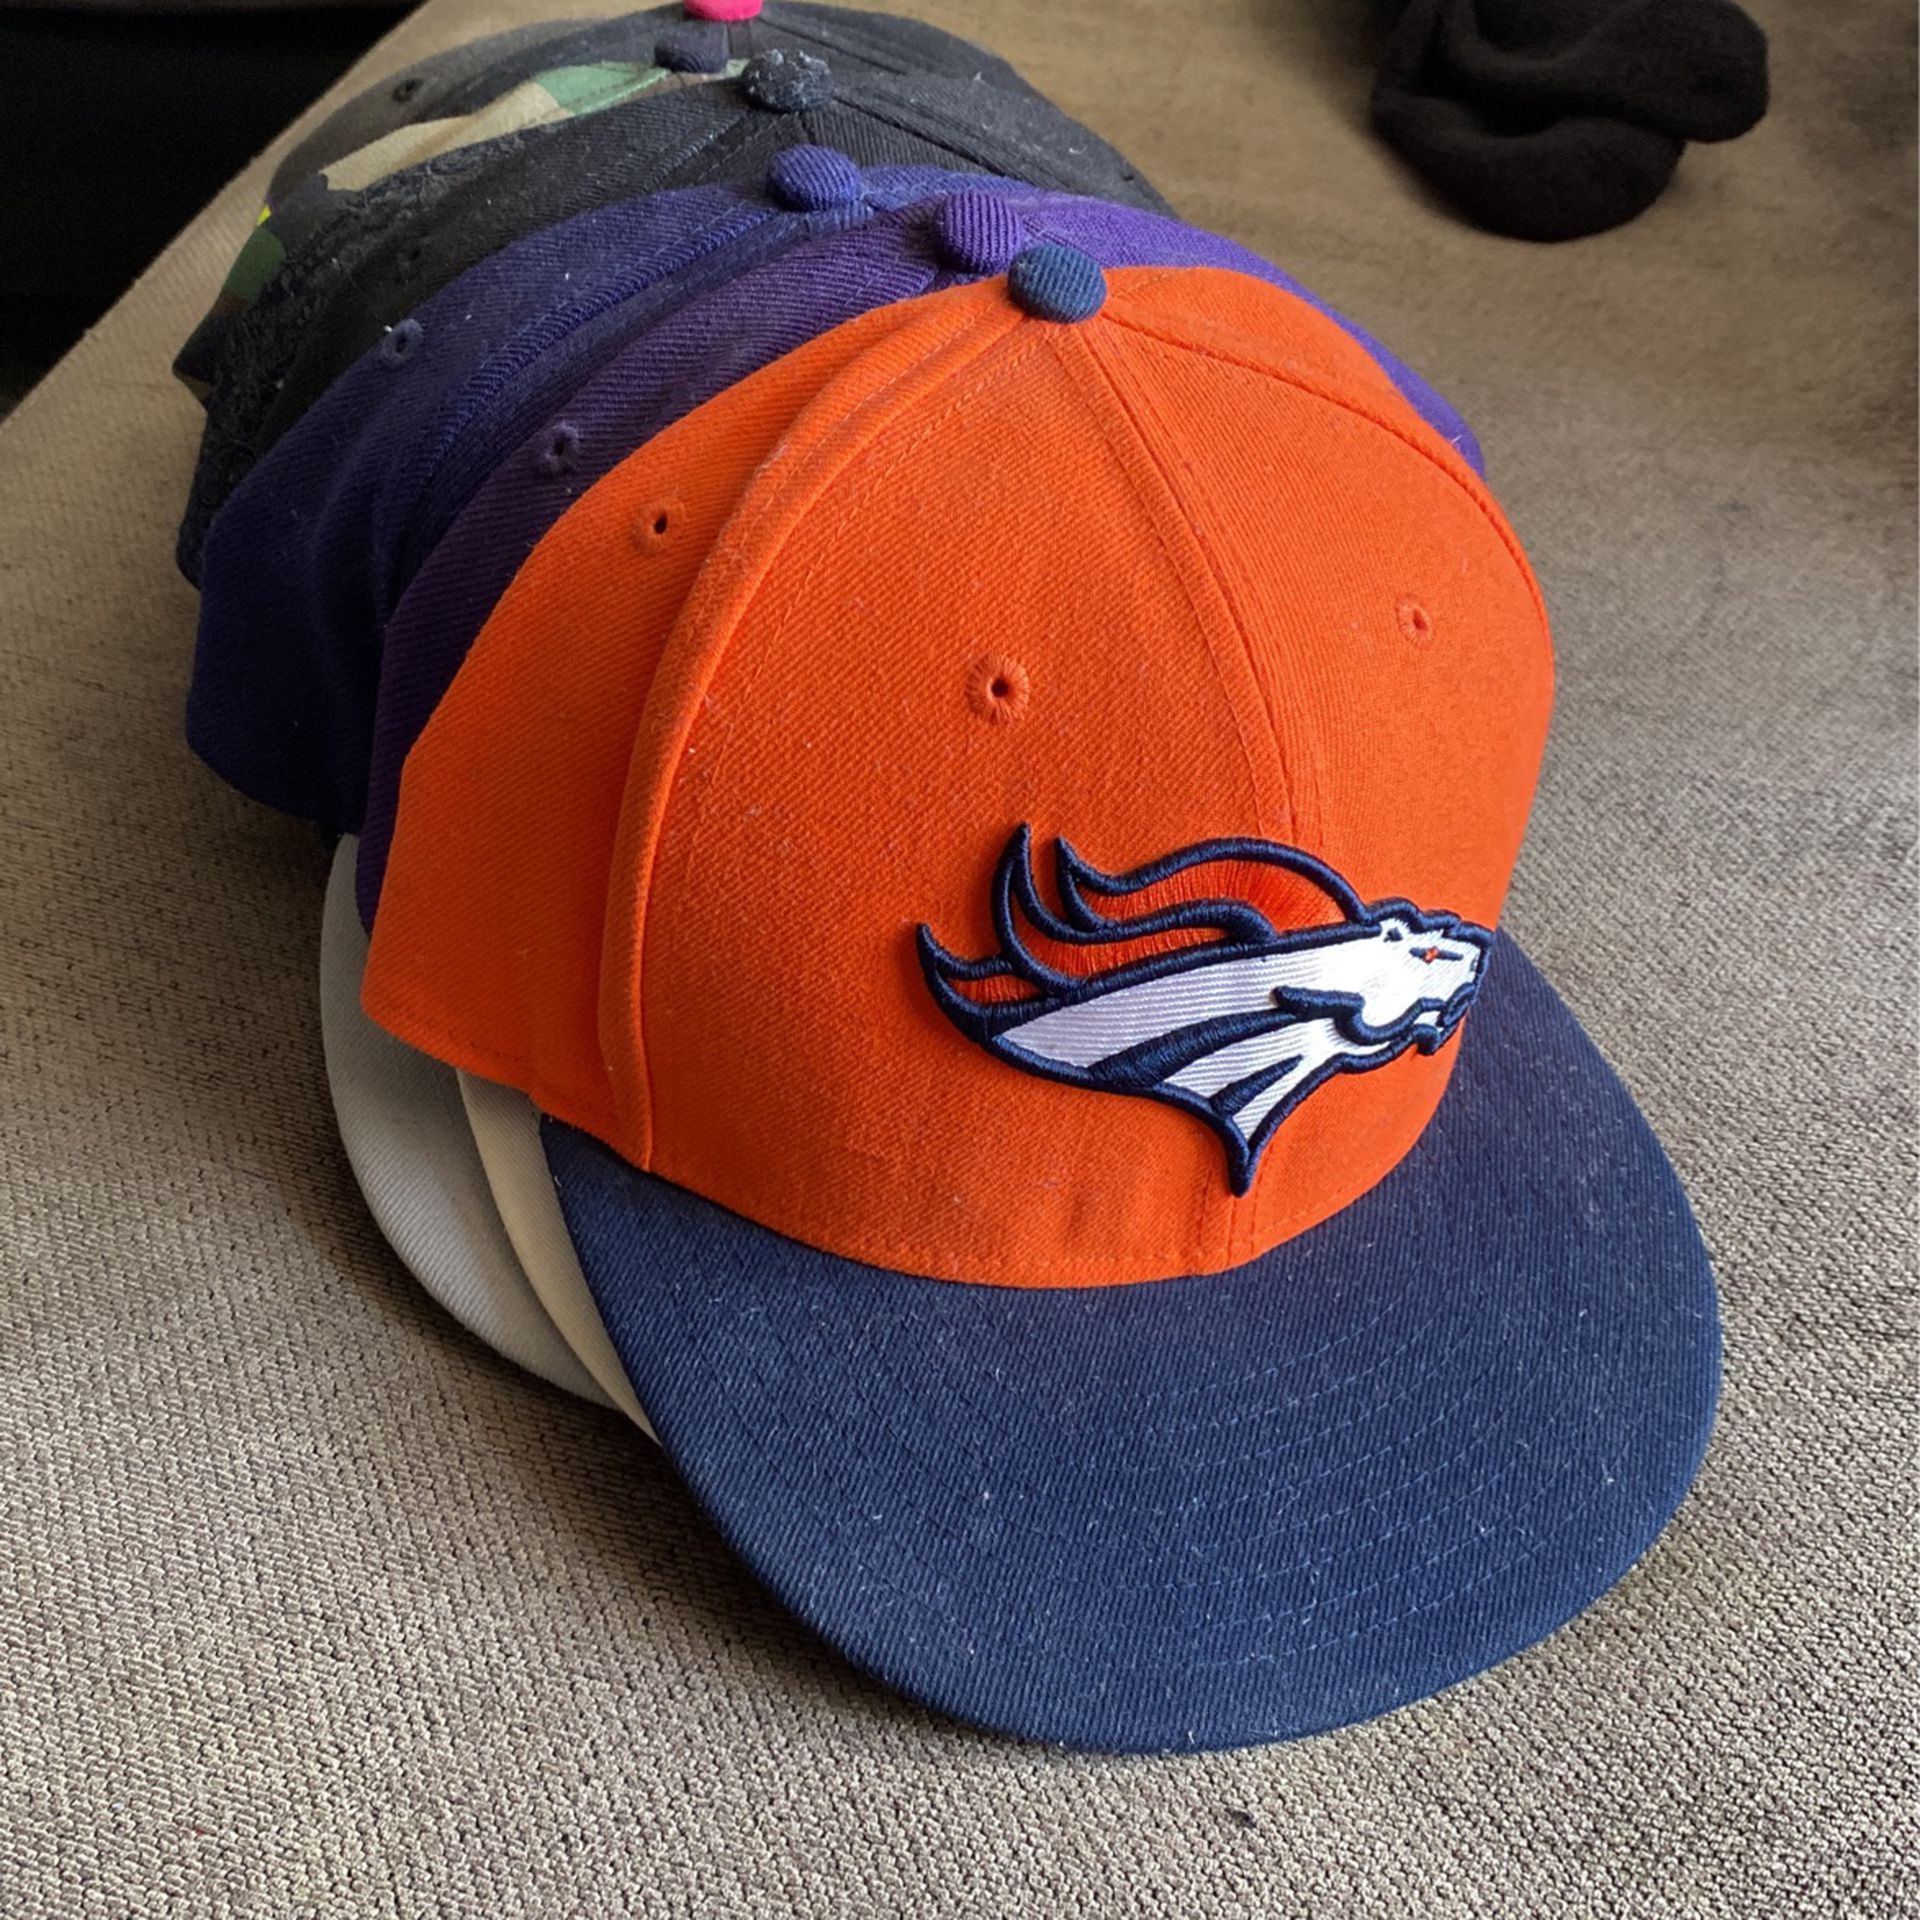 $5 Hats - Fitted Caps And Snap Backs